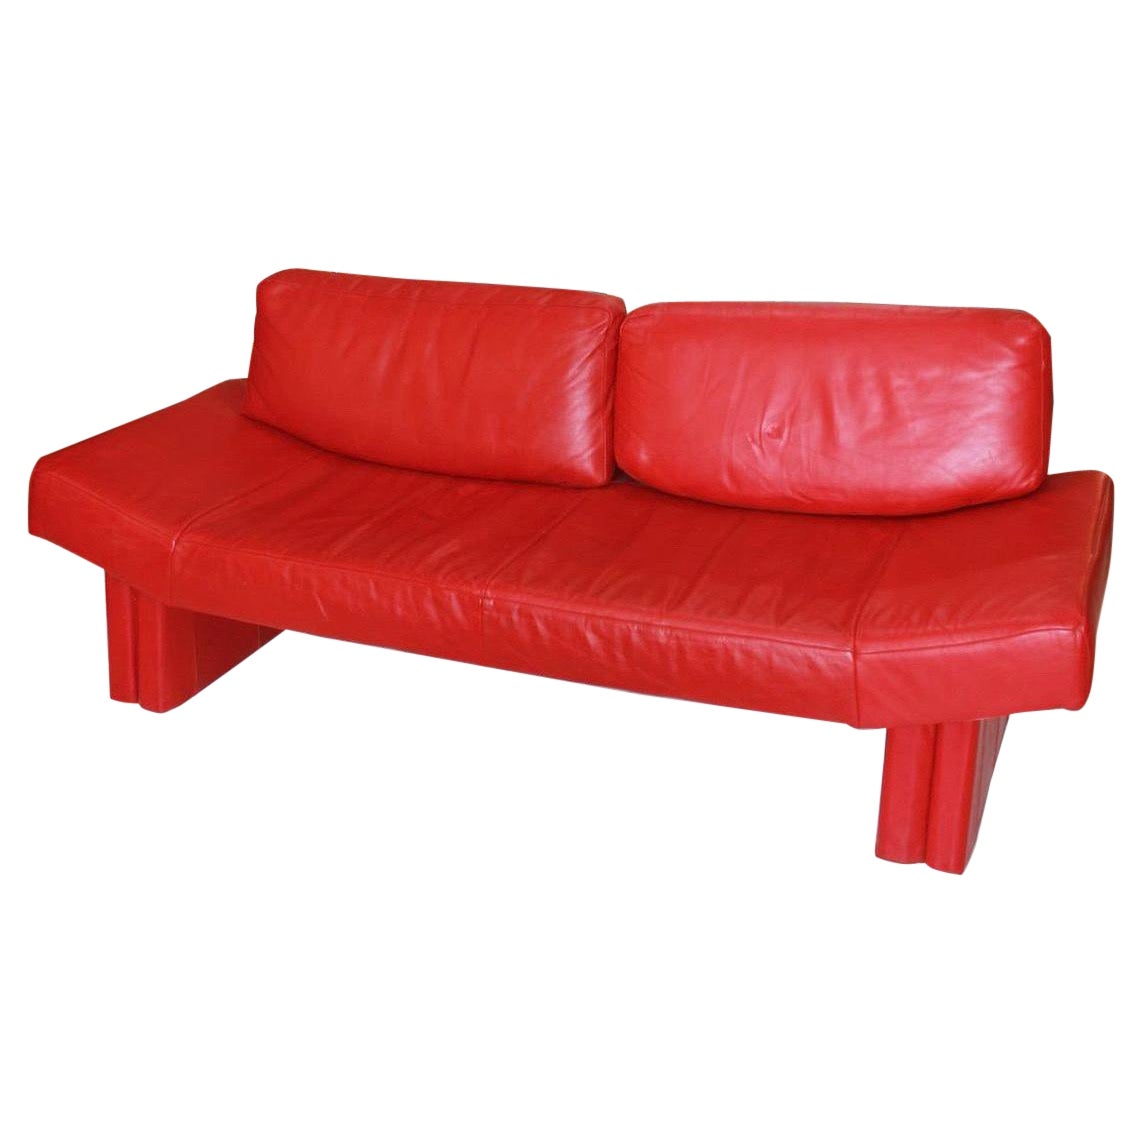 Post Modern Red Leather Sofa by Flep S.P.a. Bitonto, Made in Italy For Sale